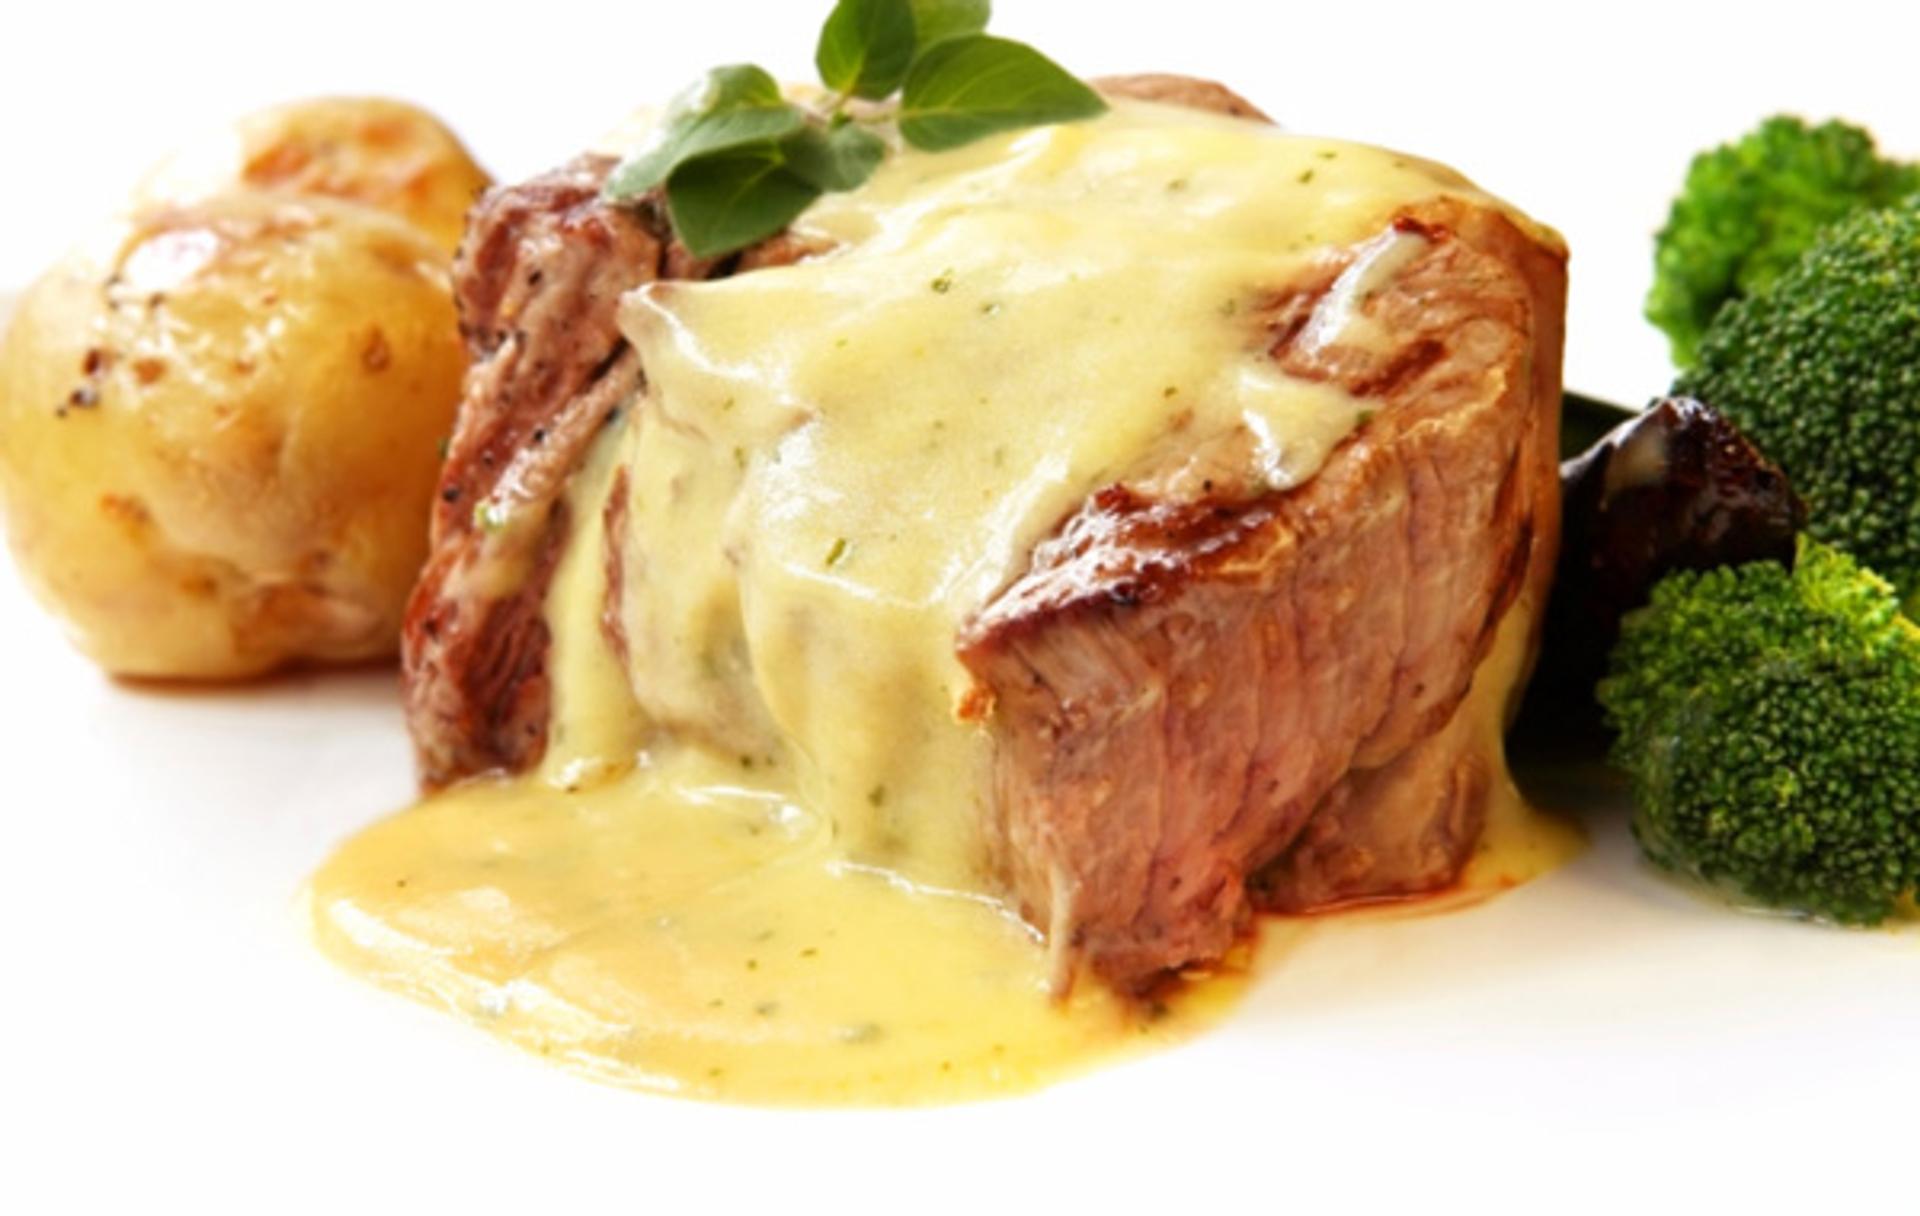 Chateaubriand sauce béarnaise